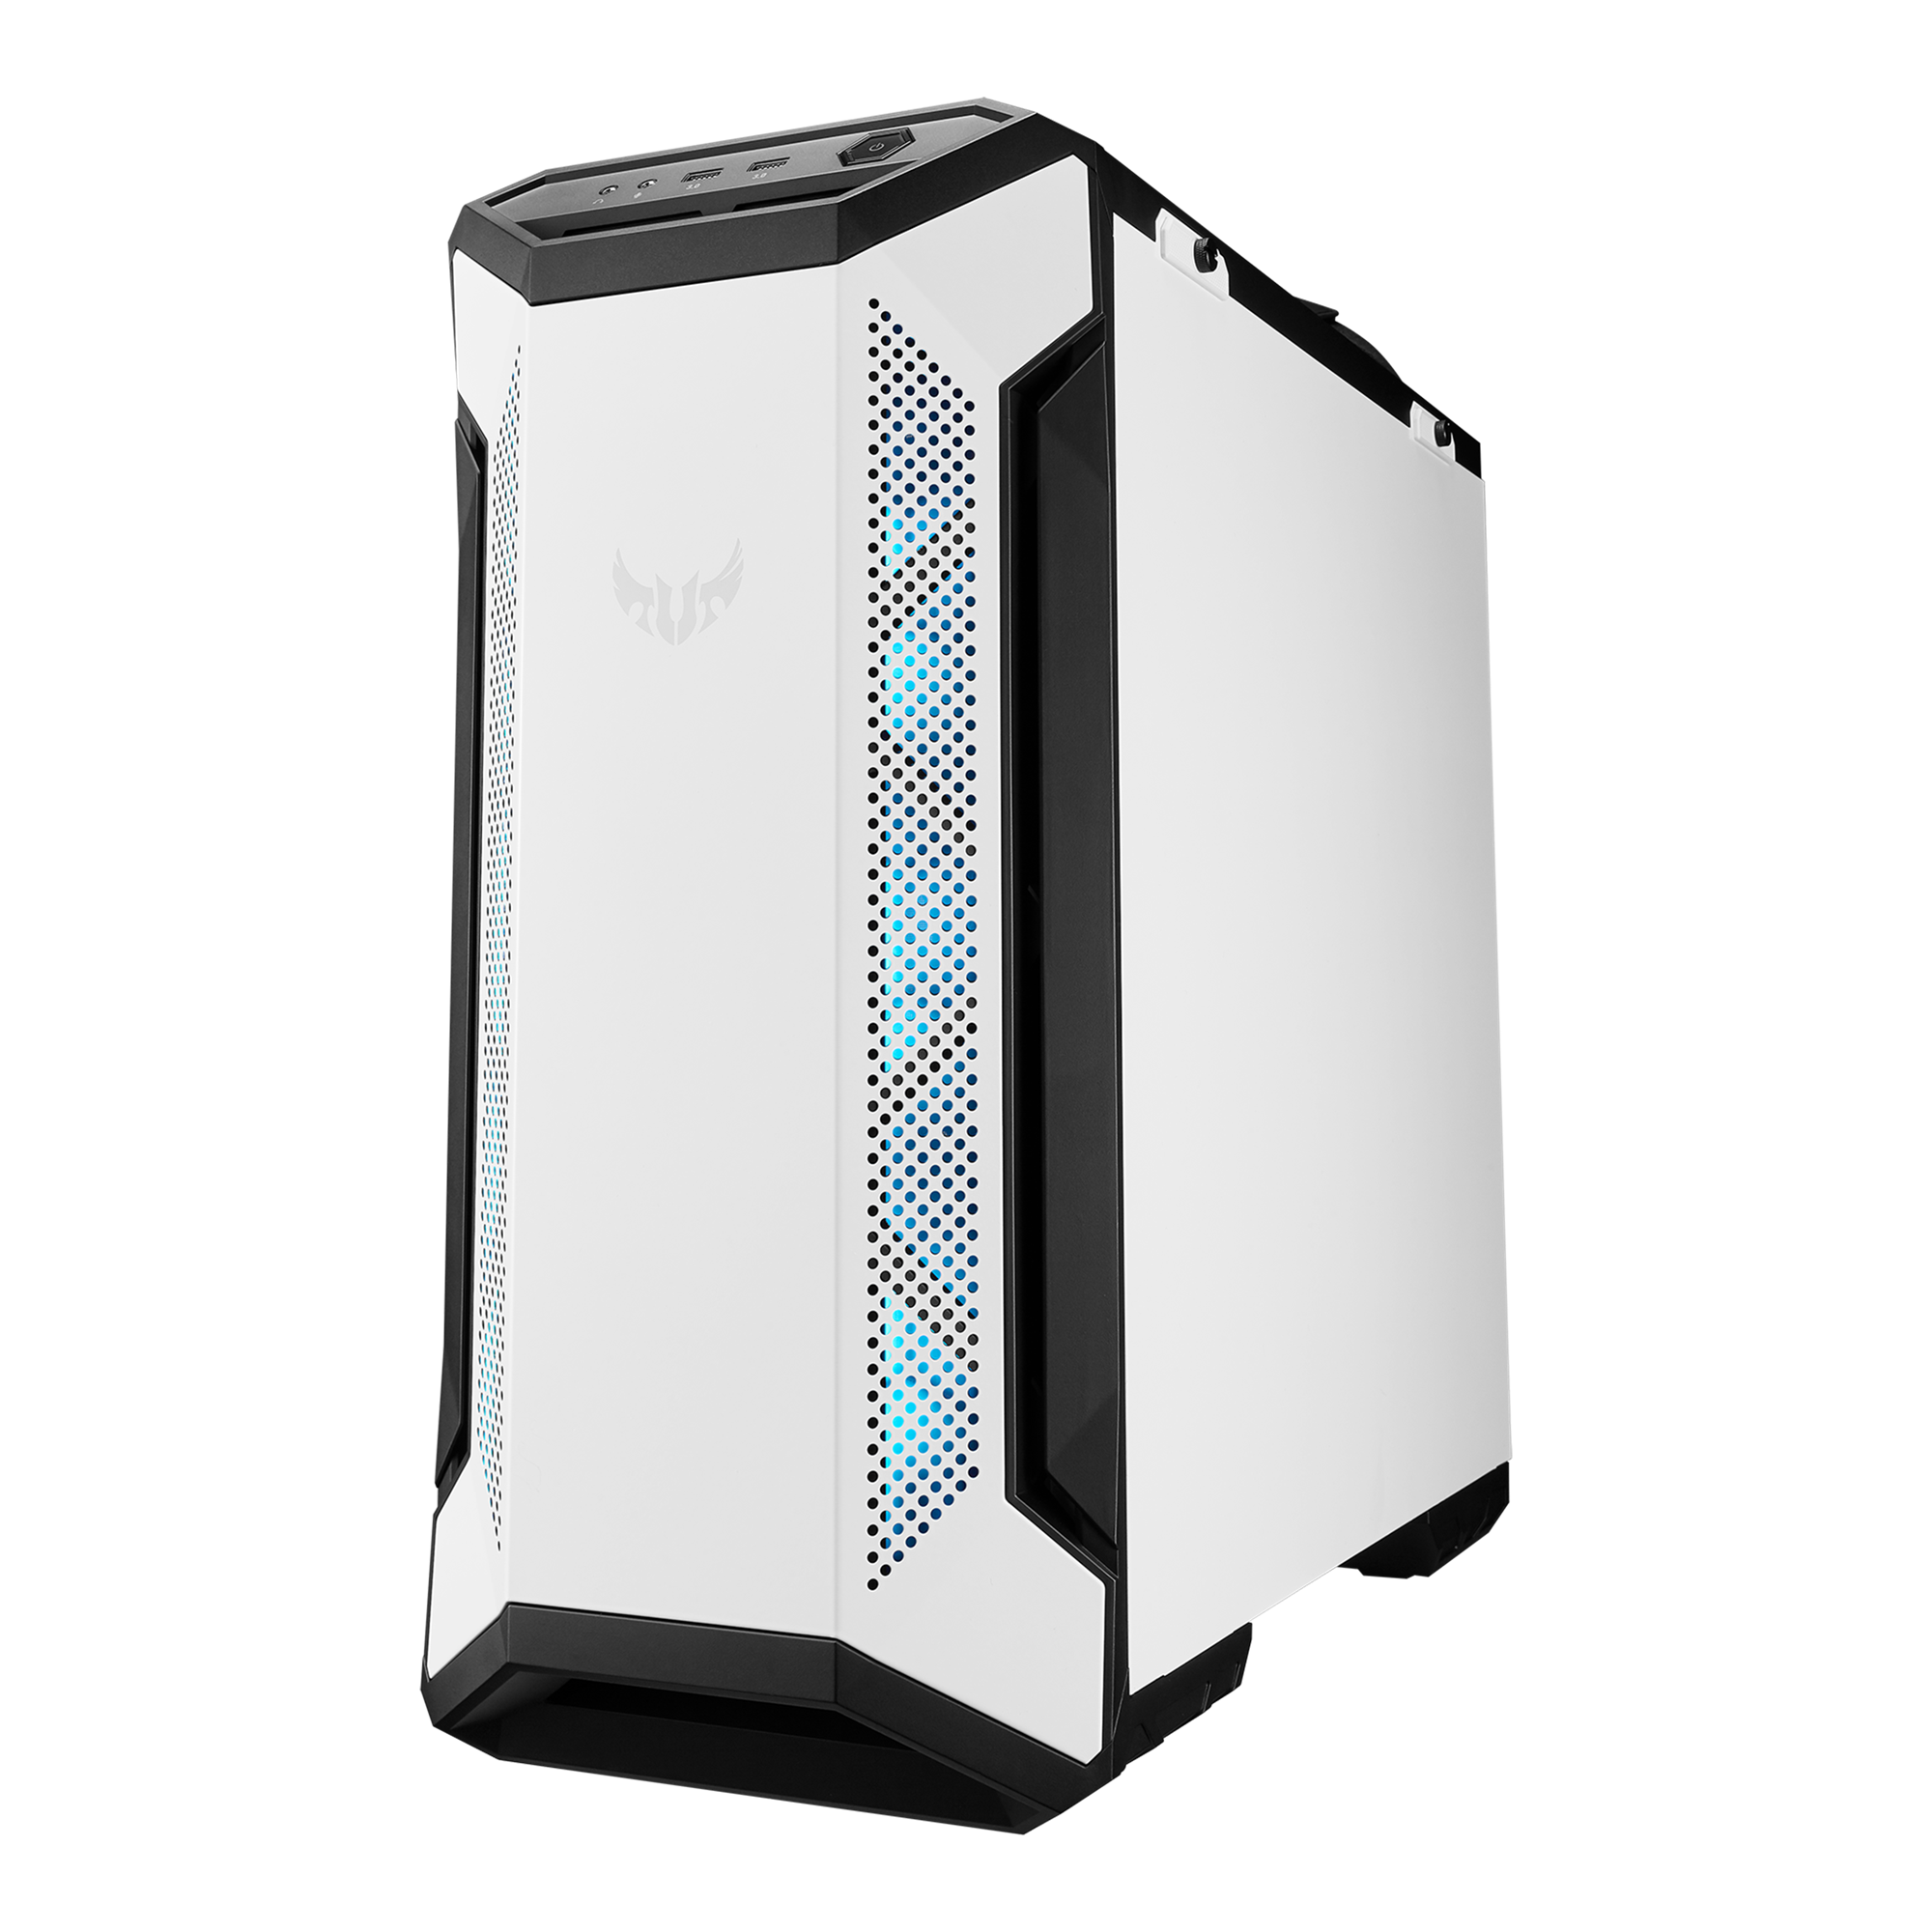 BOITIER ASUS TUF Gaming GT501 Mid-Tower